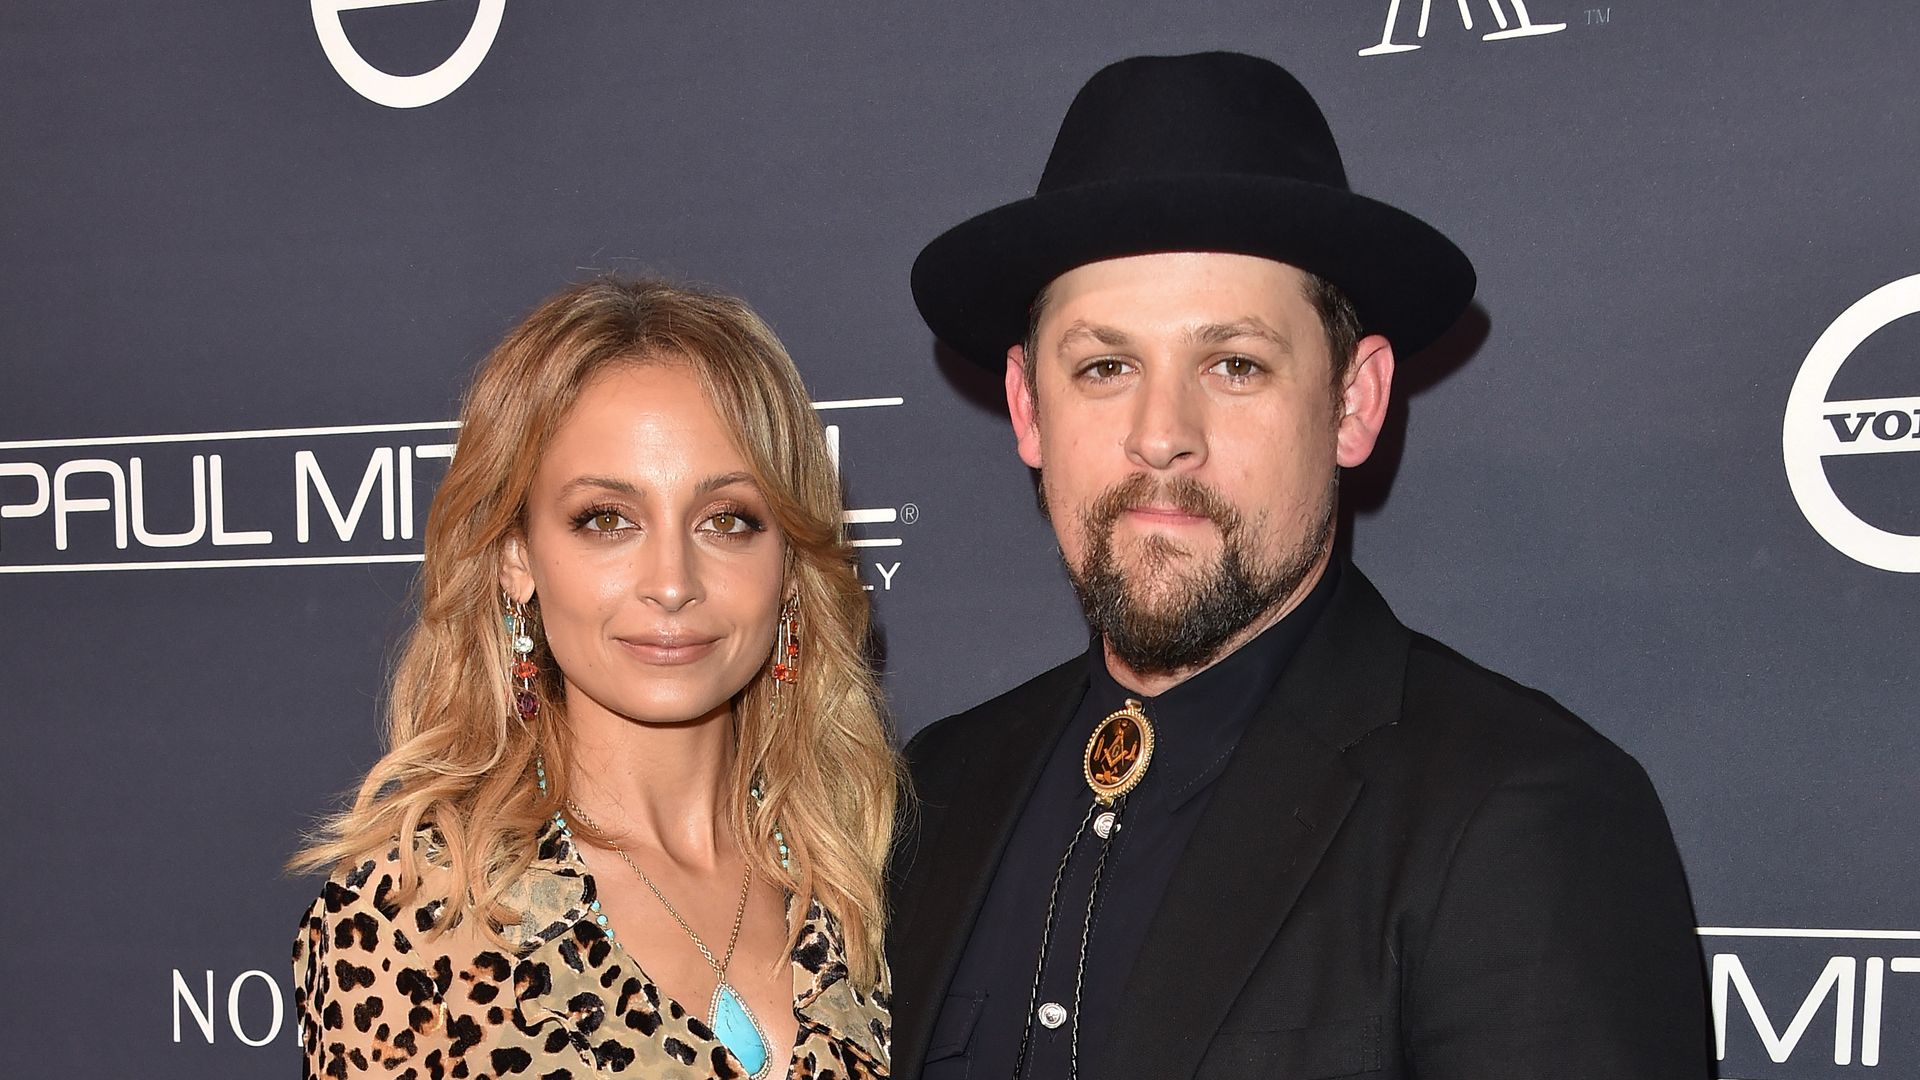 Nicole Richie and musician Joel Madden attend the 2017 Baby2Baby Gala at 3LABS on November 11, 2017 in Culver City, California